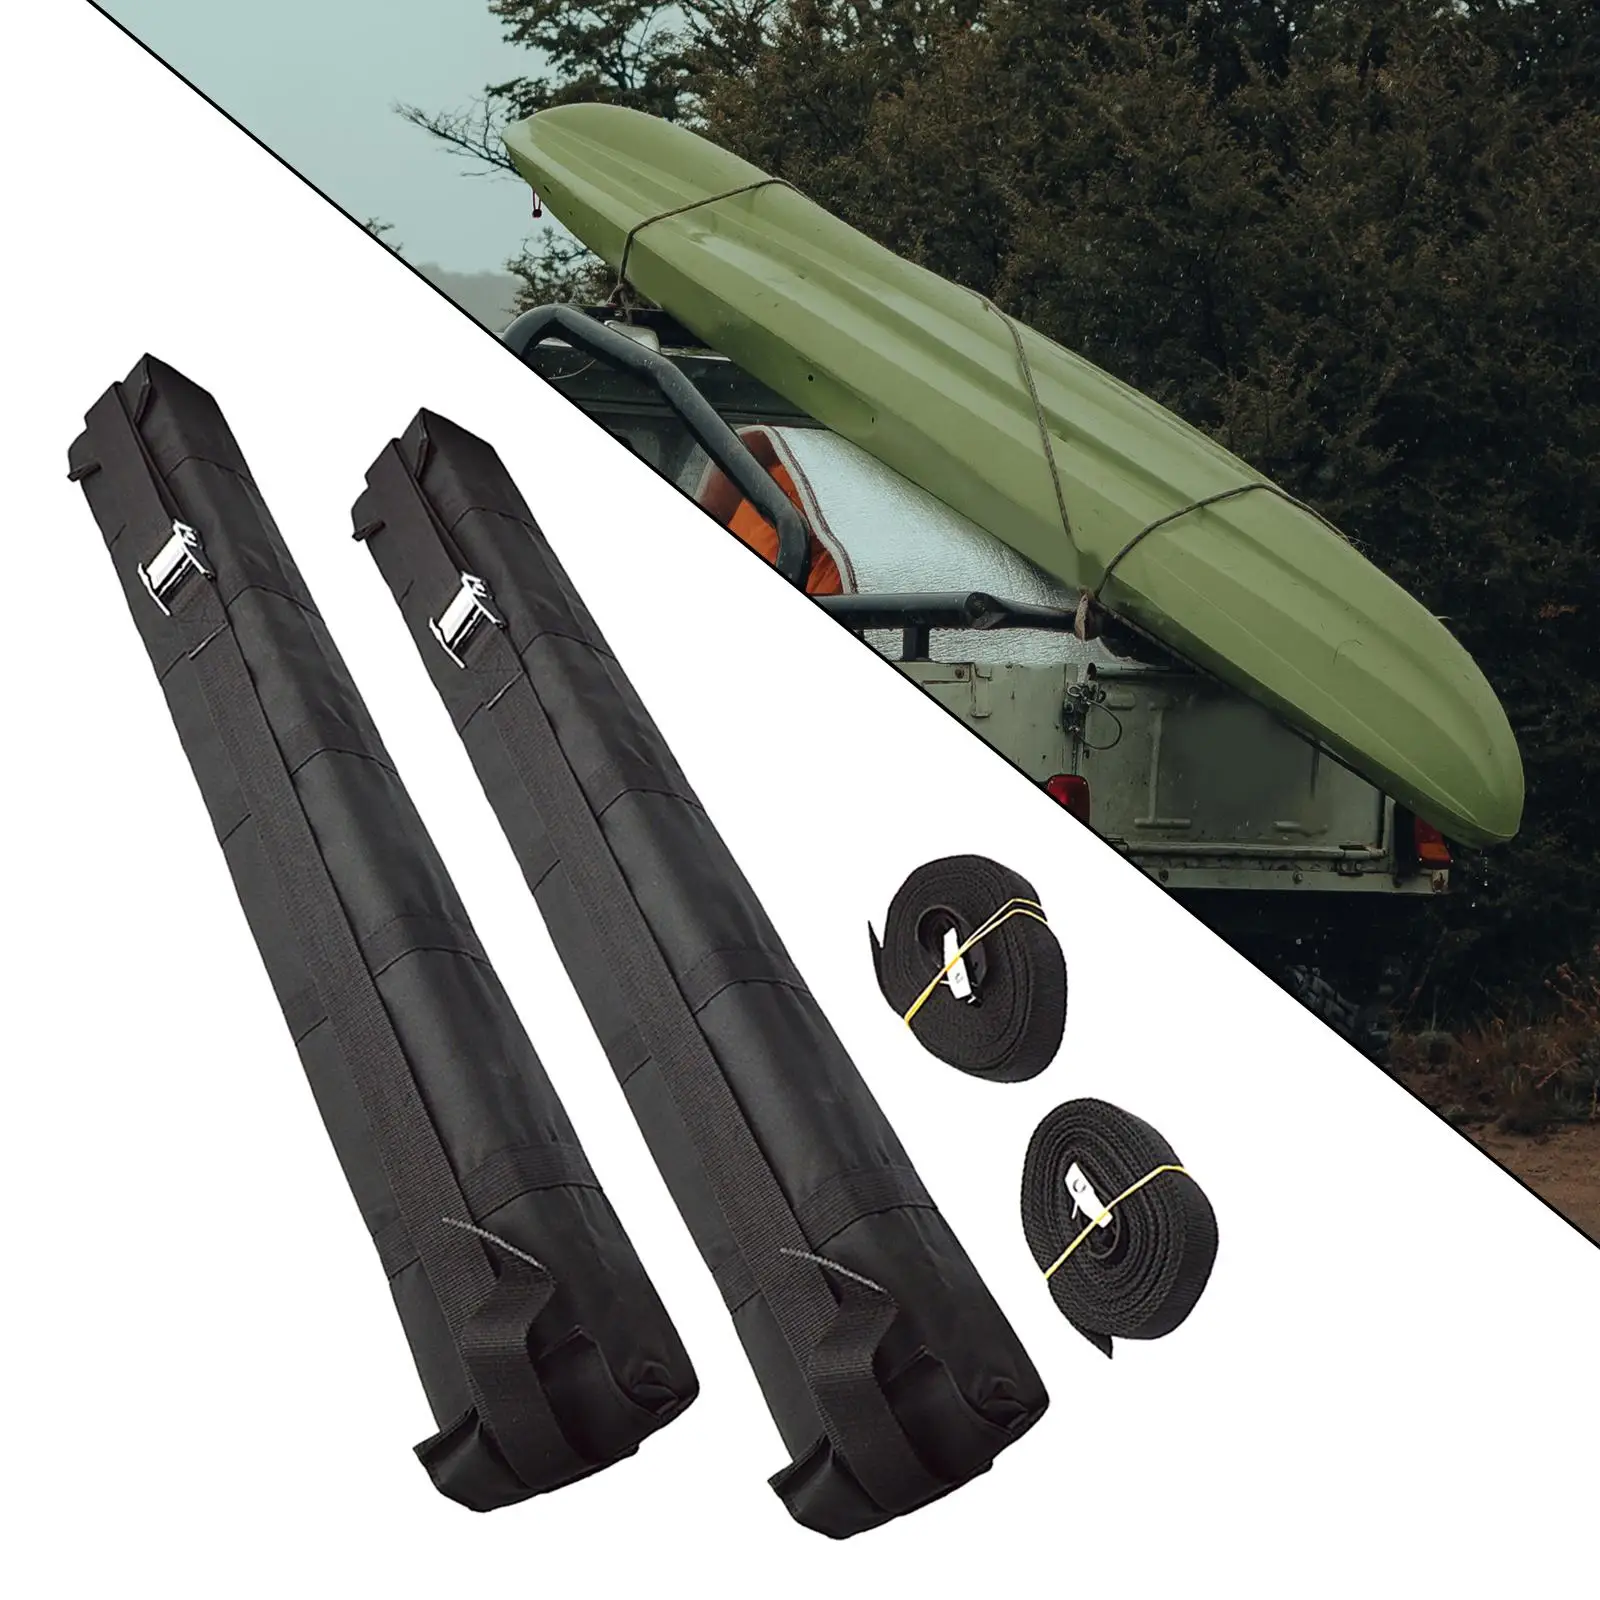 Roof Racks,  Soft Roof Bars, Kayak Roof Rack, Durable Oxford Cloth Roof Rack Pads Carrier Heavy Duty  Straps